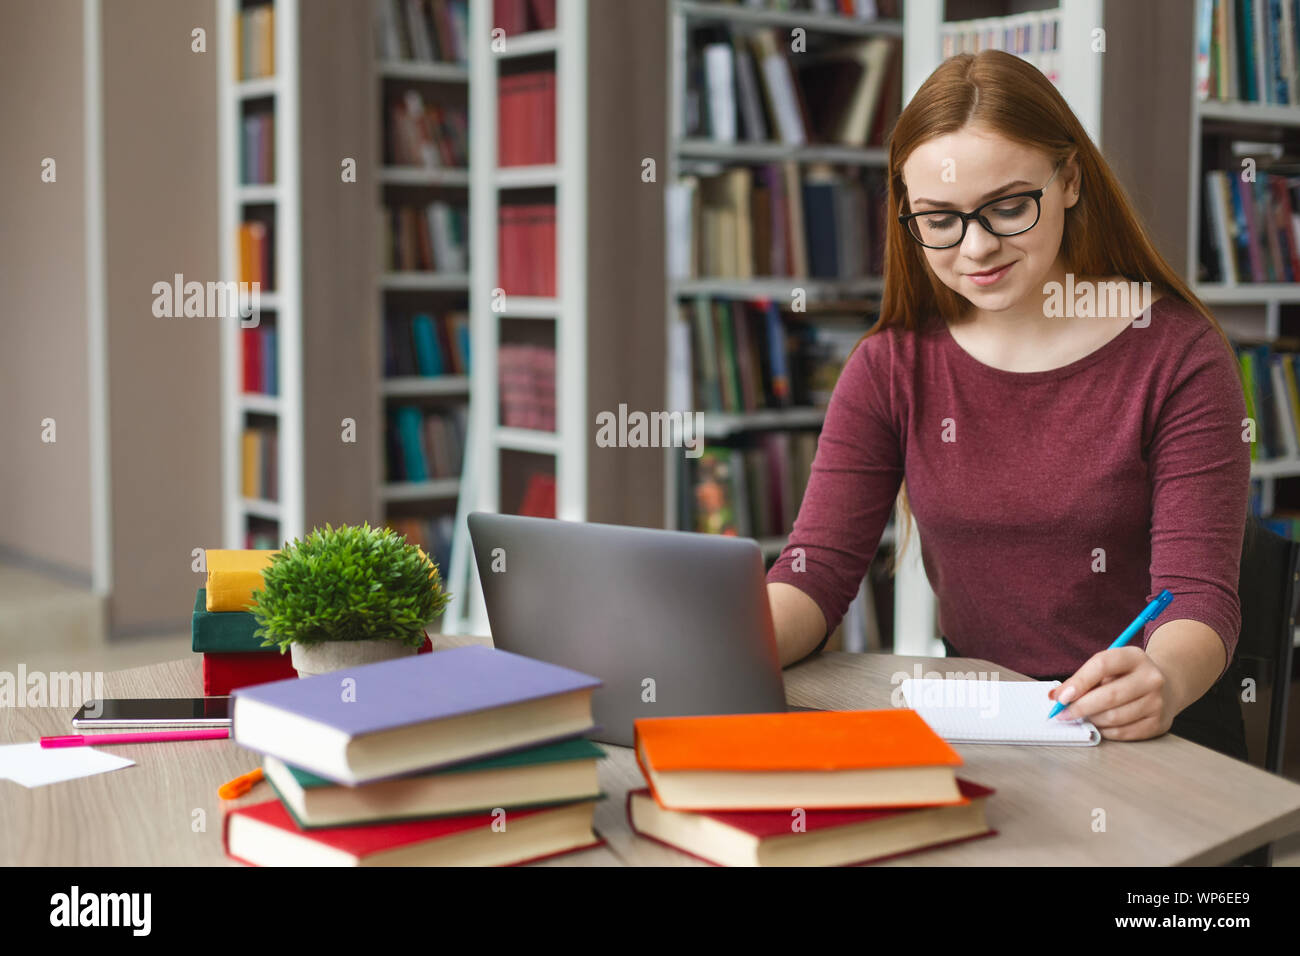 Redhead pretty girl making notes while studying Stock Photo